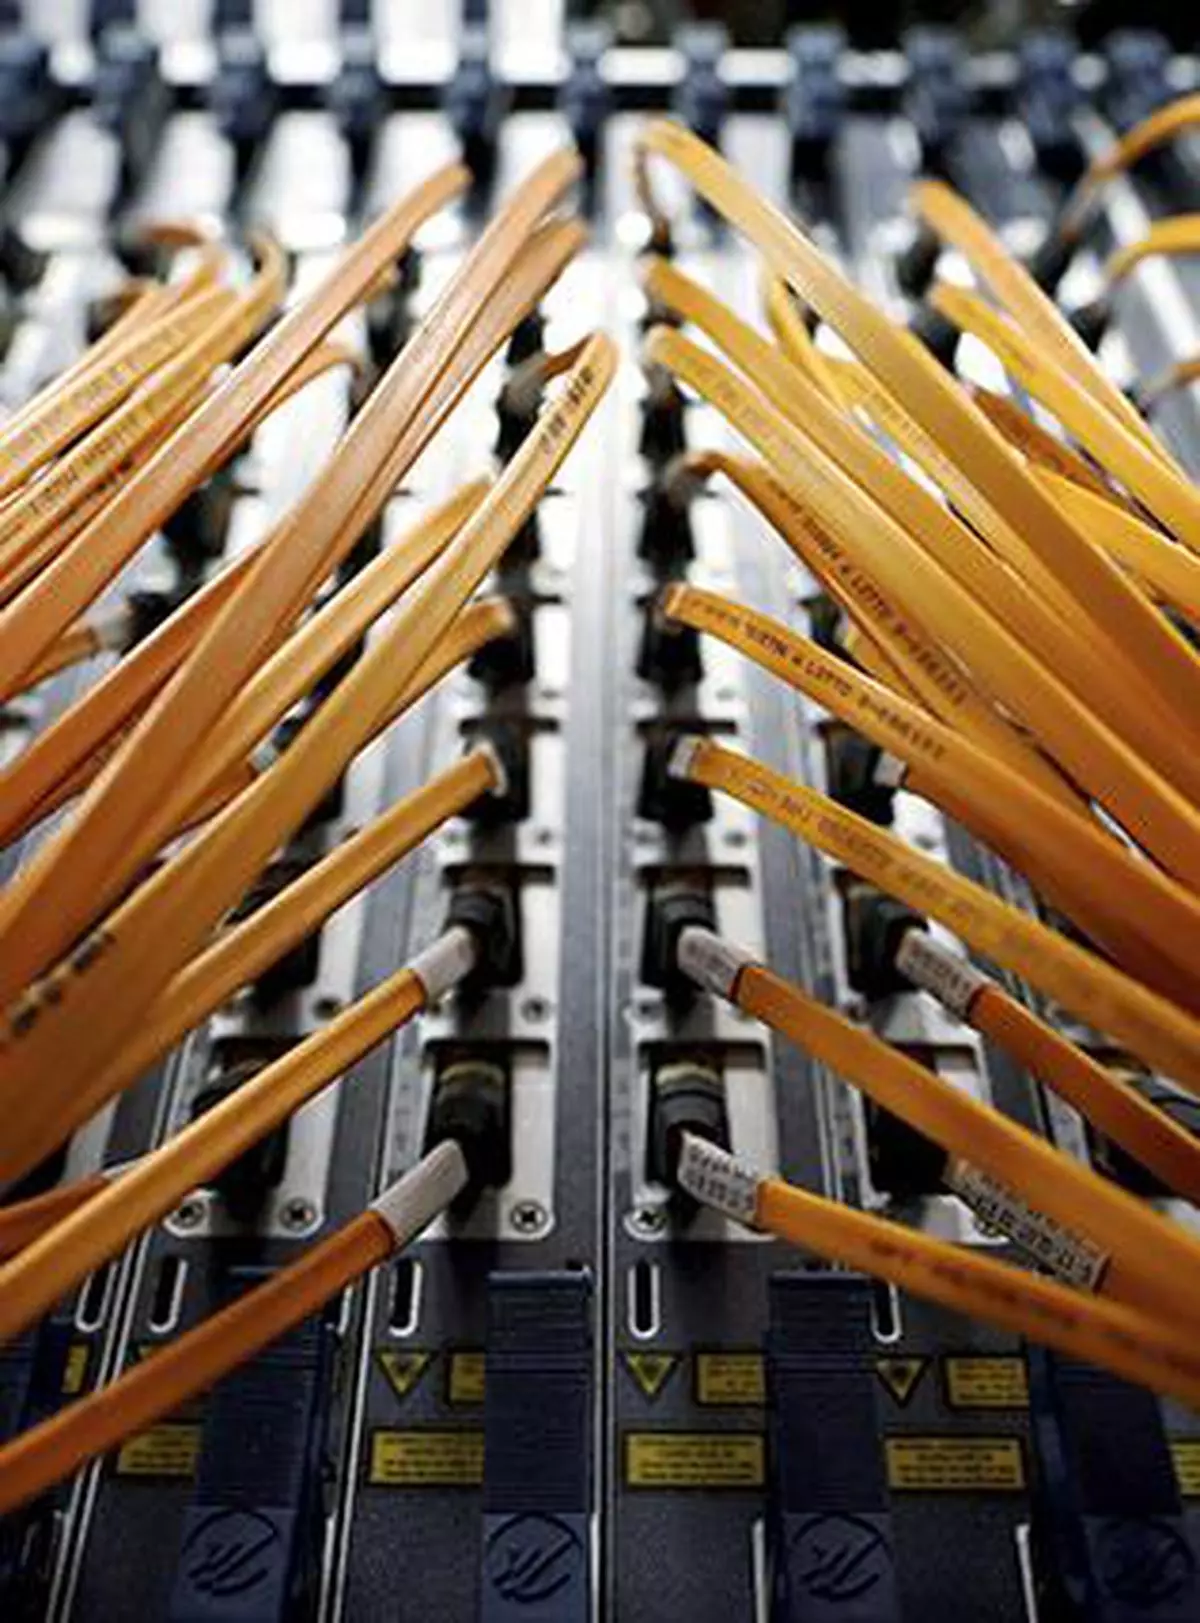 FILE PHOTO: Optical fibre cables of Telecom Italia are seen in a telephone exchange in Rome, Italy December 20, 2013. REUTERS/Alessandro Bianchi/File Photo